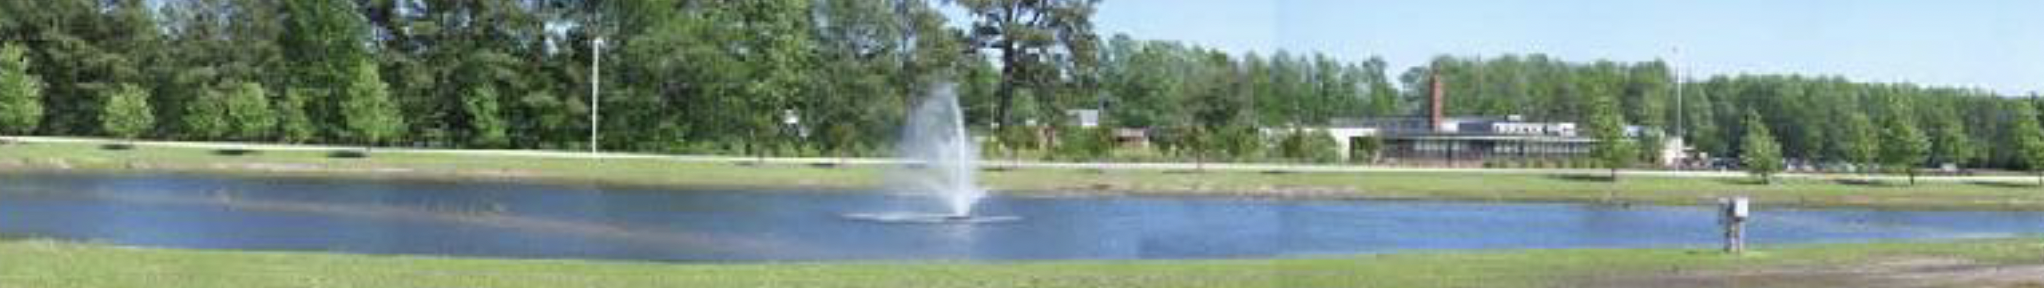 stormwater pond without improvements